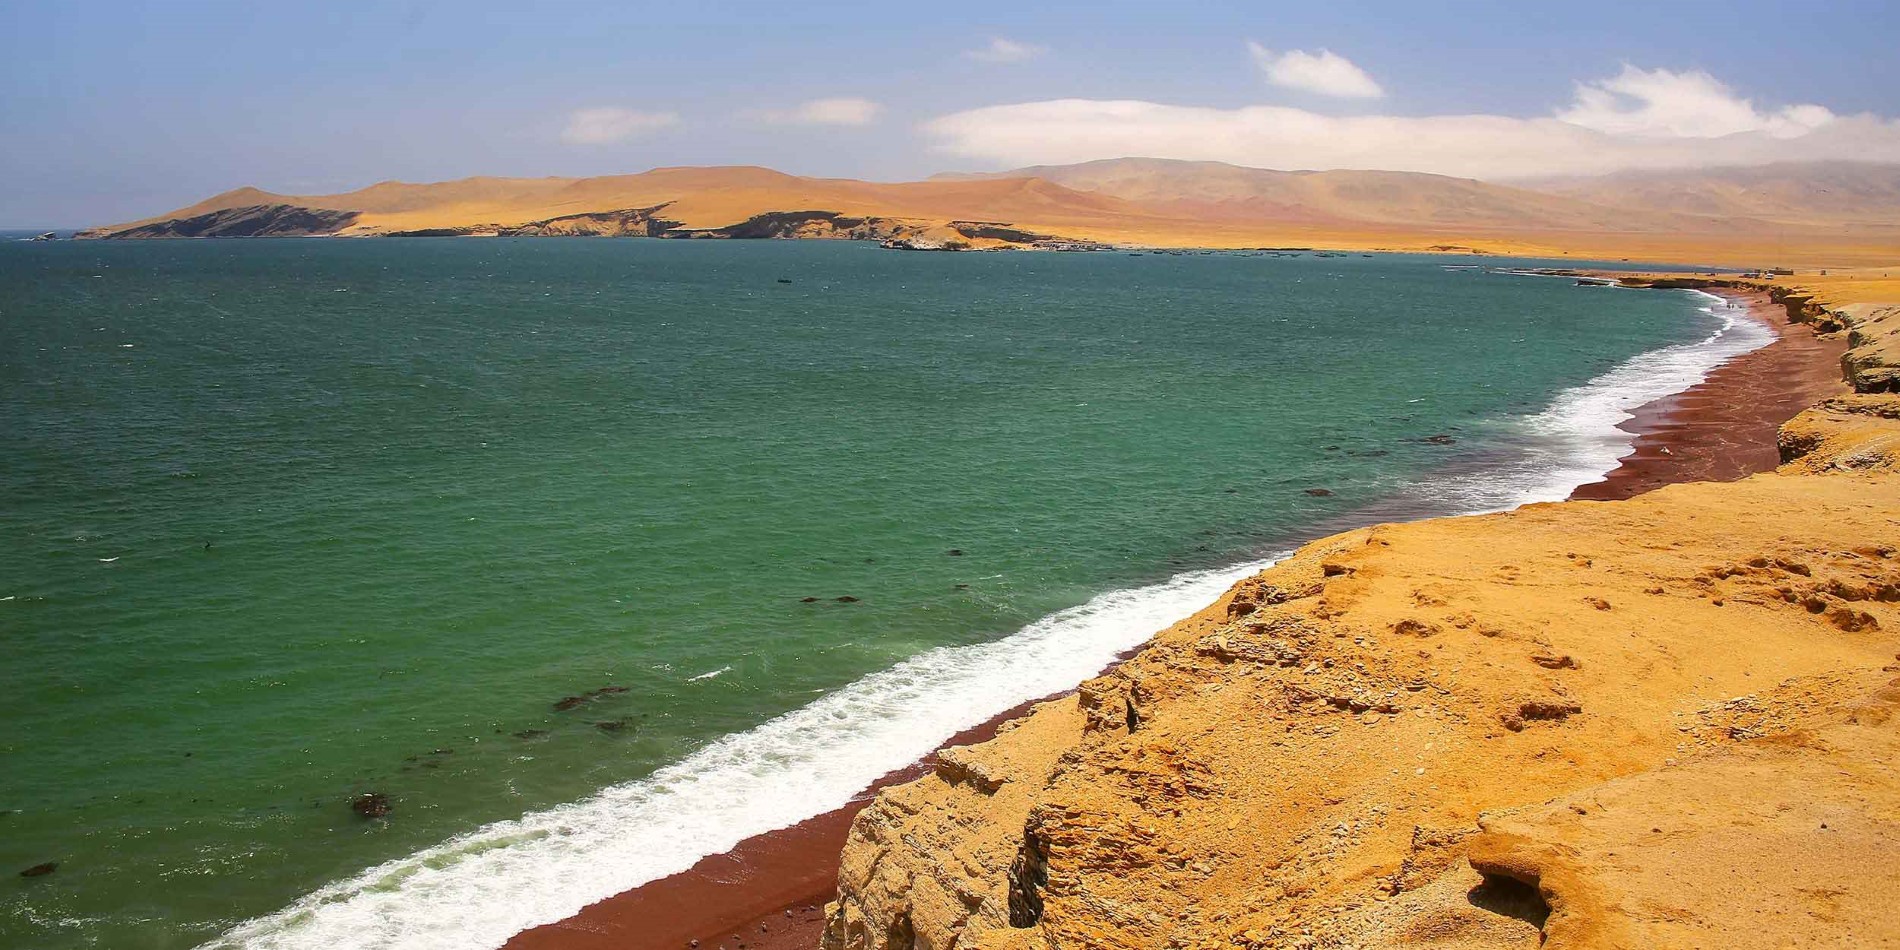 The cliffs of Paracas National Reserve in Peru